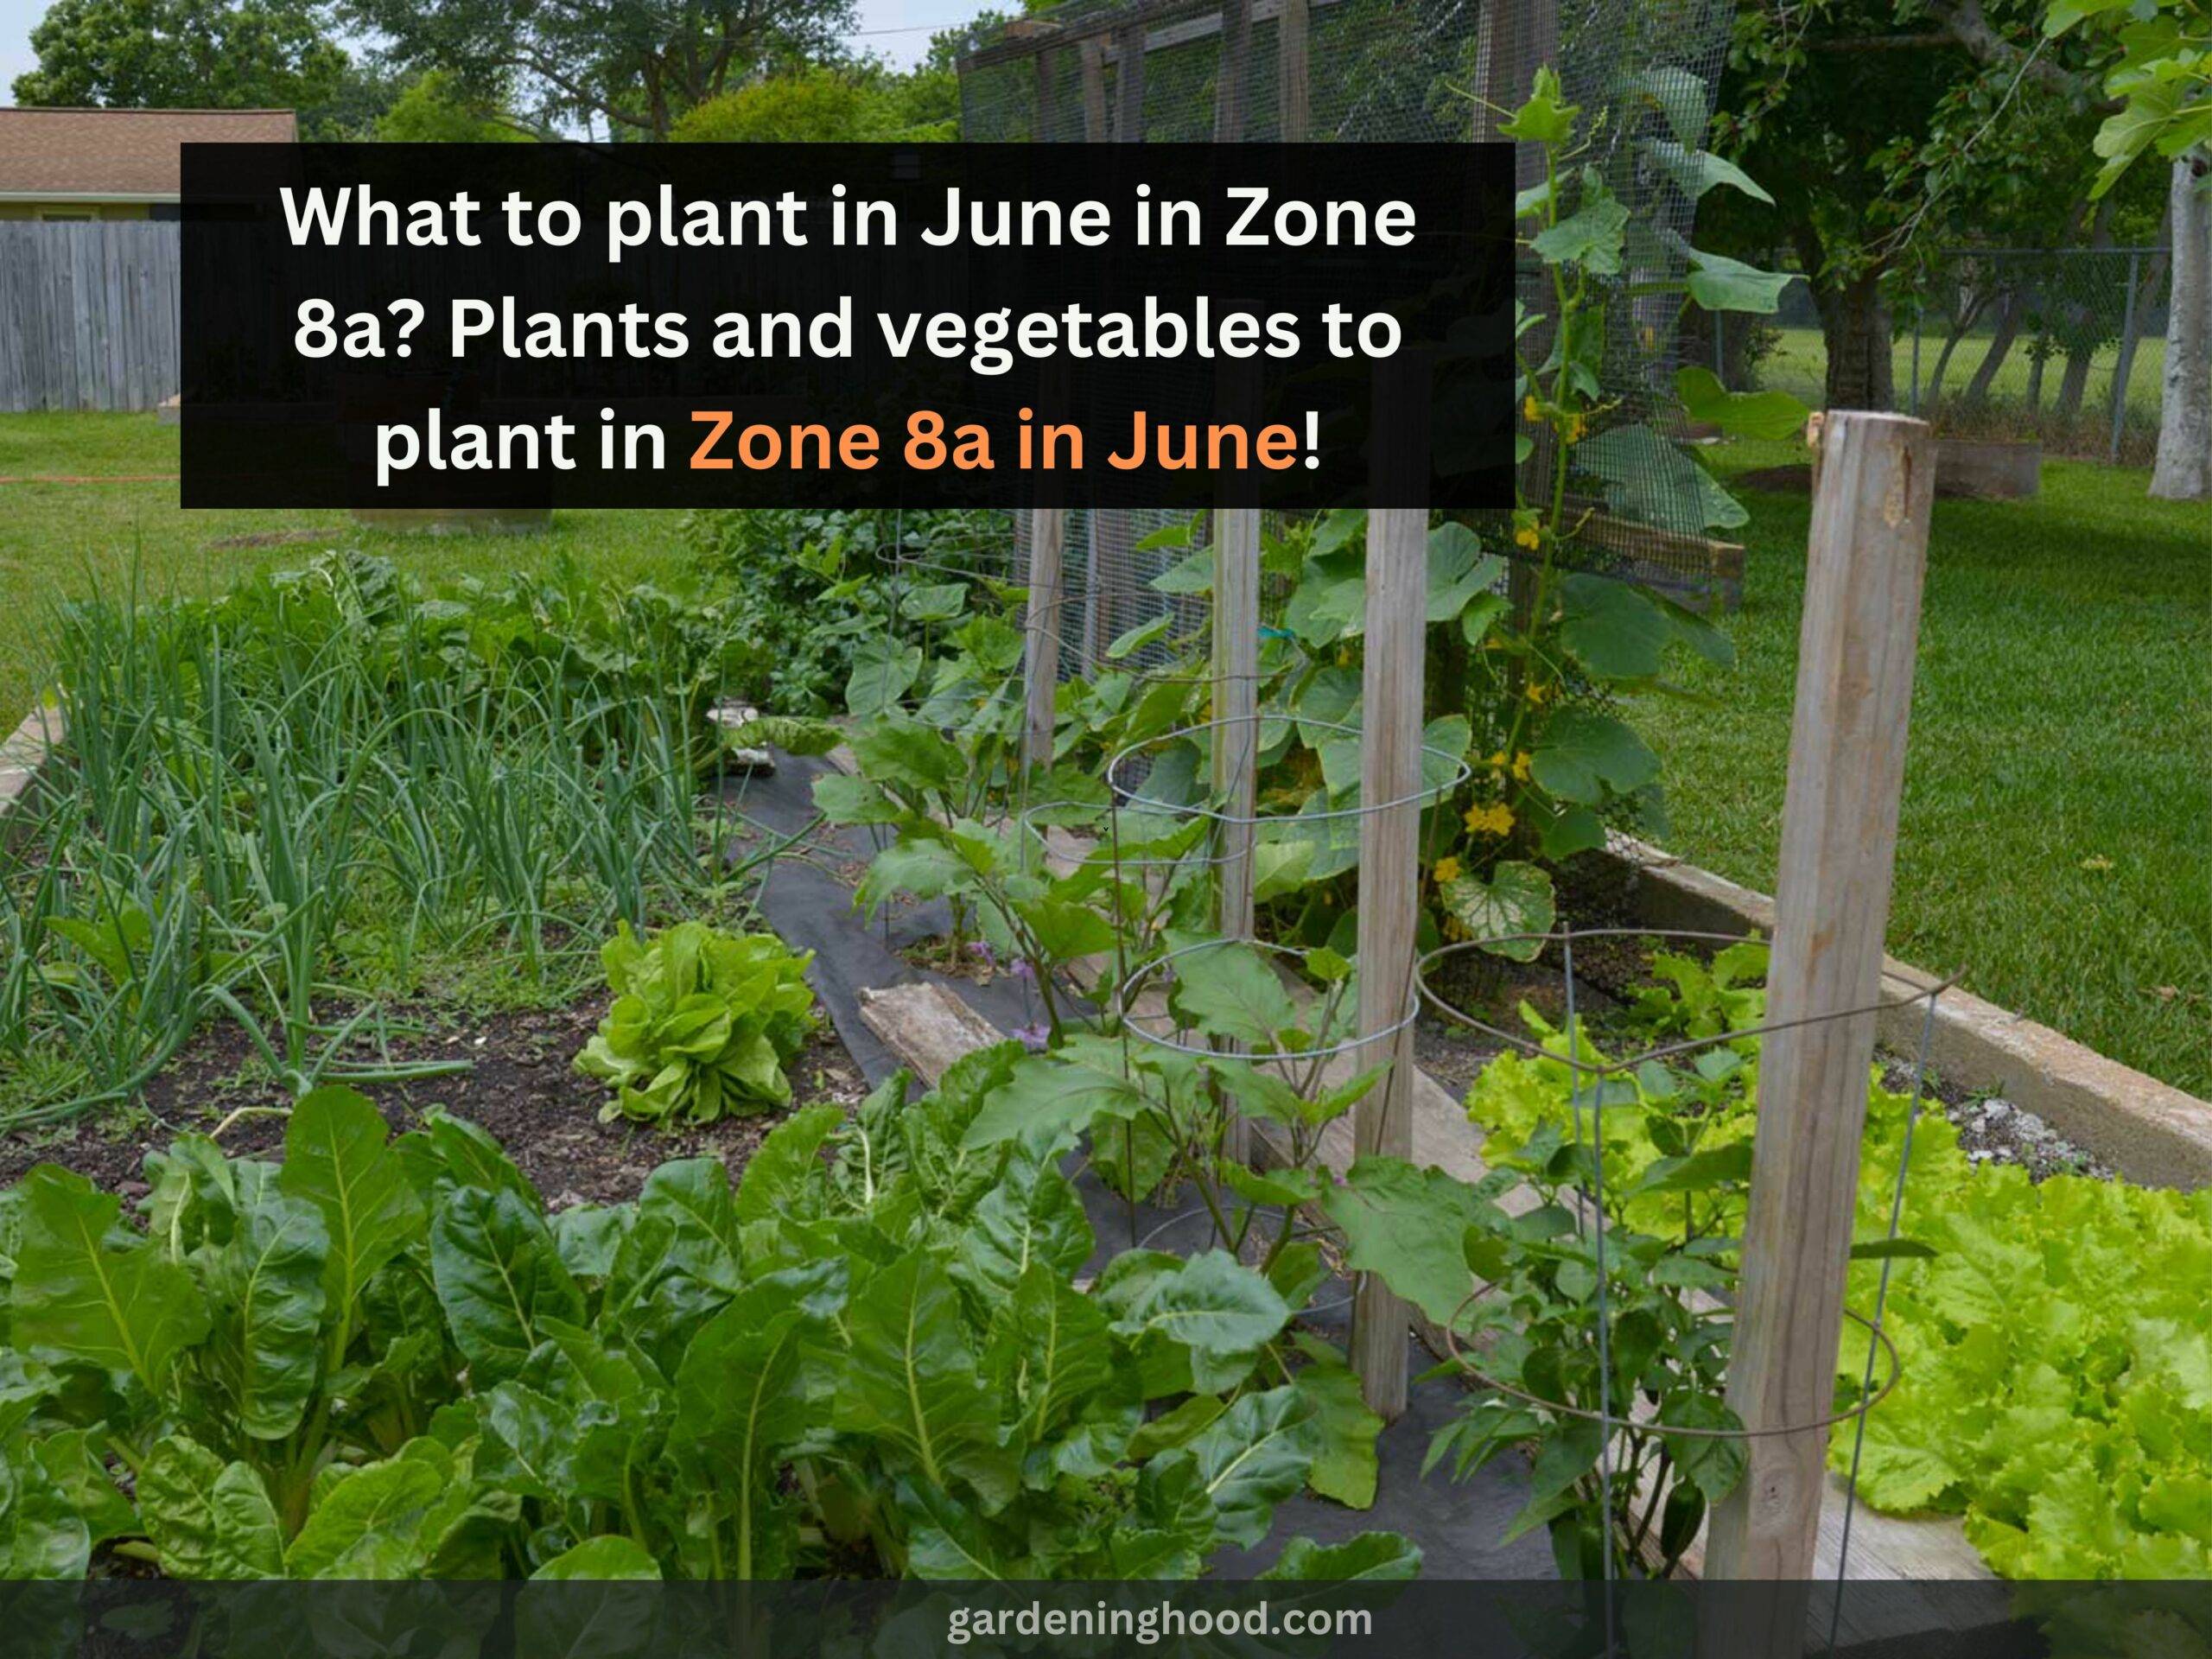 What to plant in June in Zone 8a? Plants and vegetables to plant in Zone 8a in June!